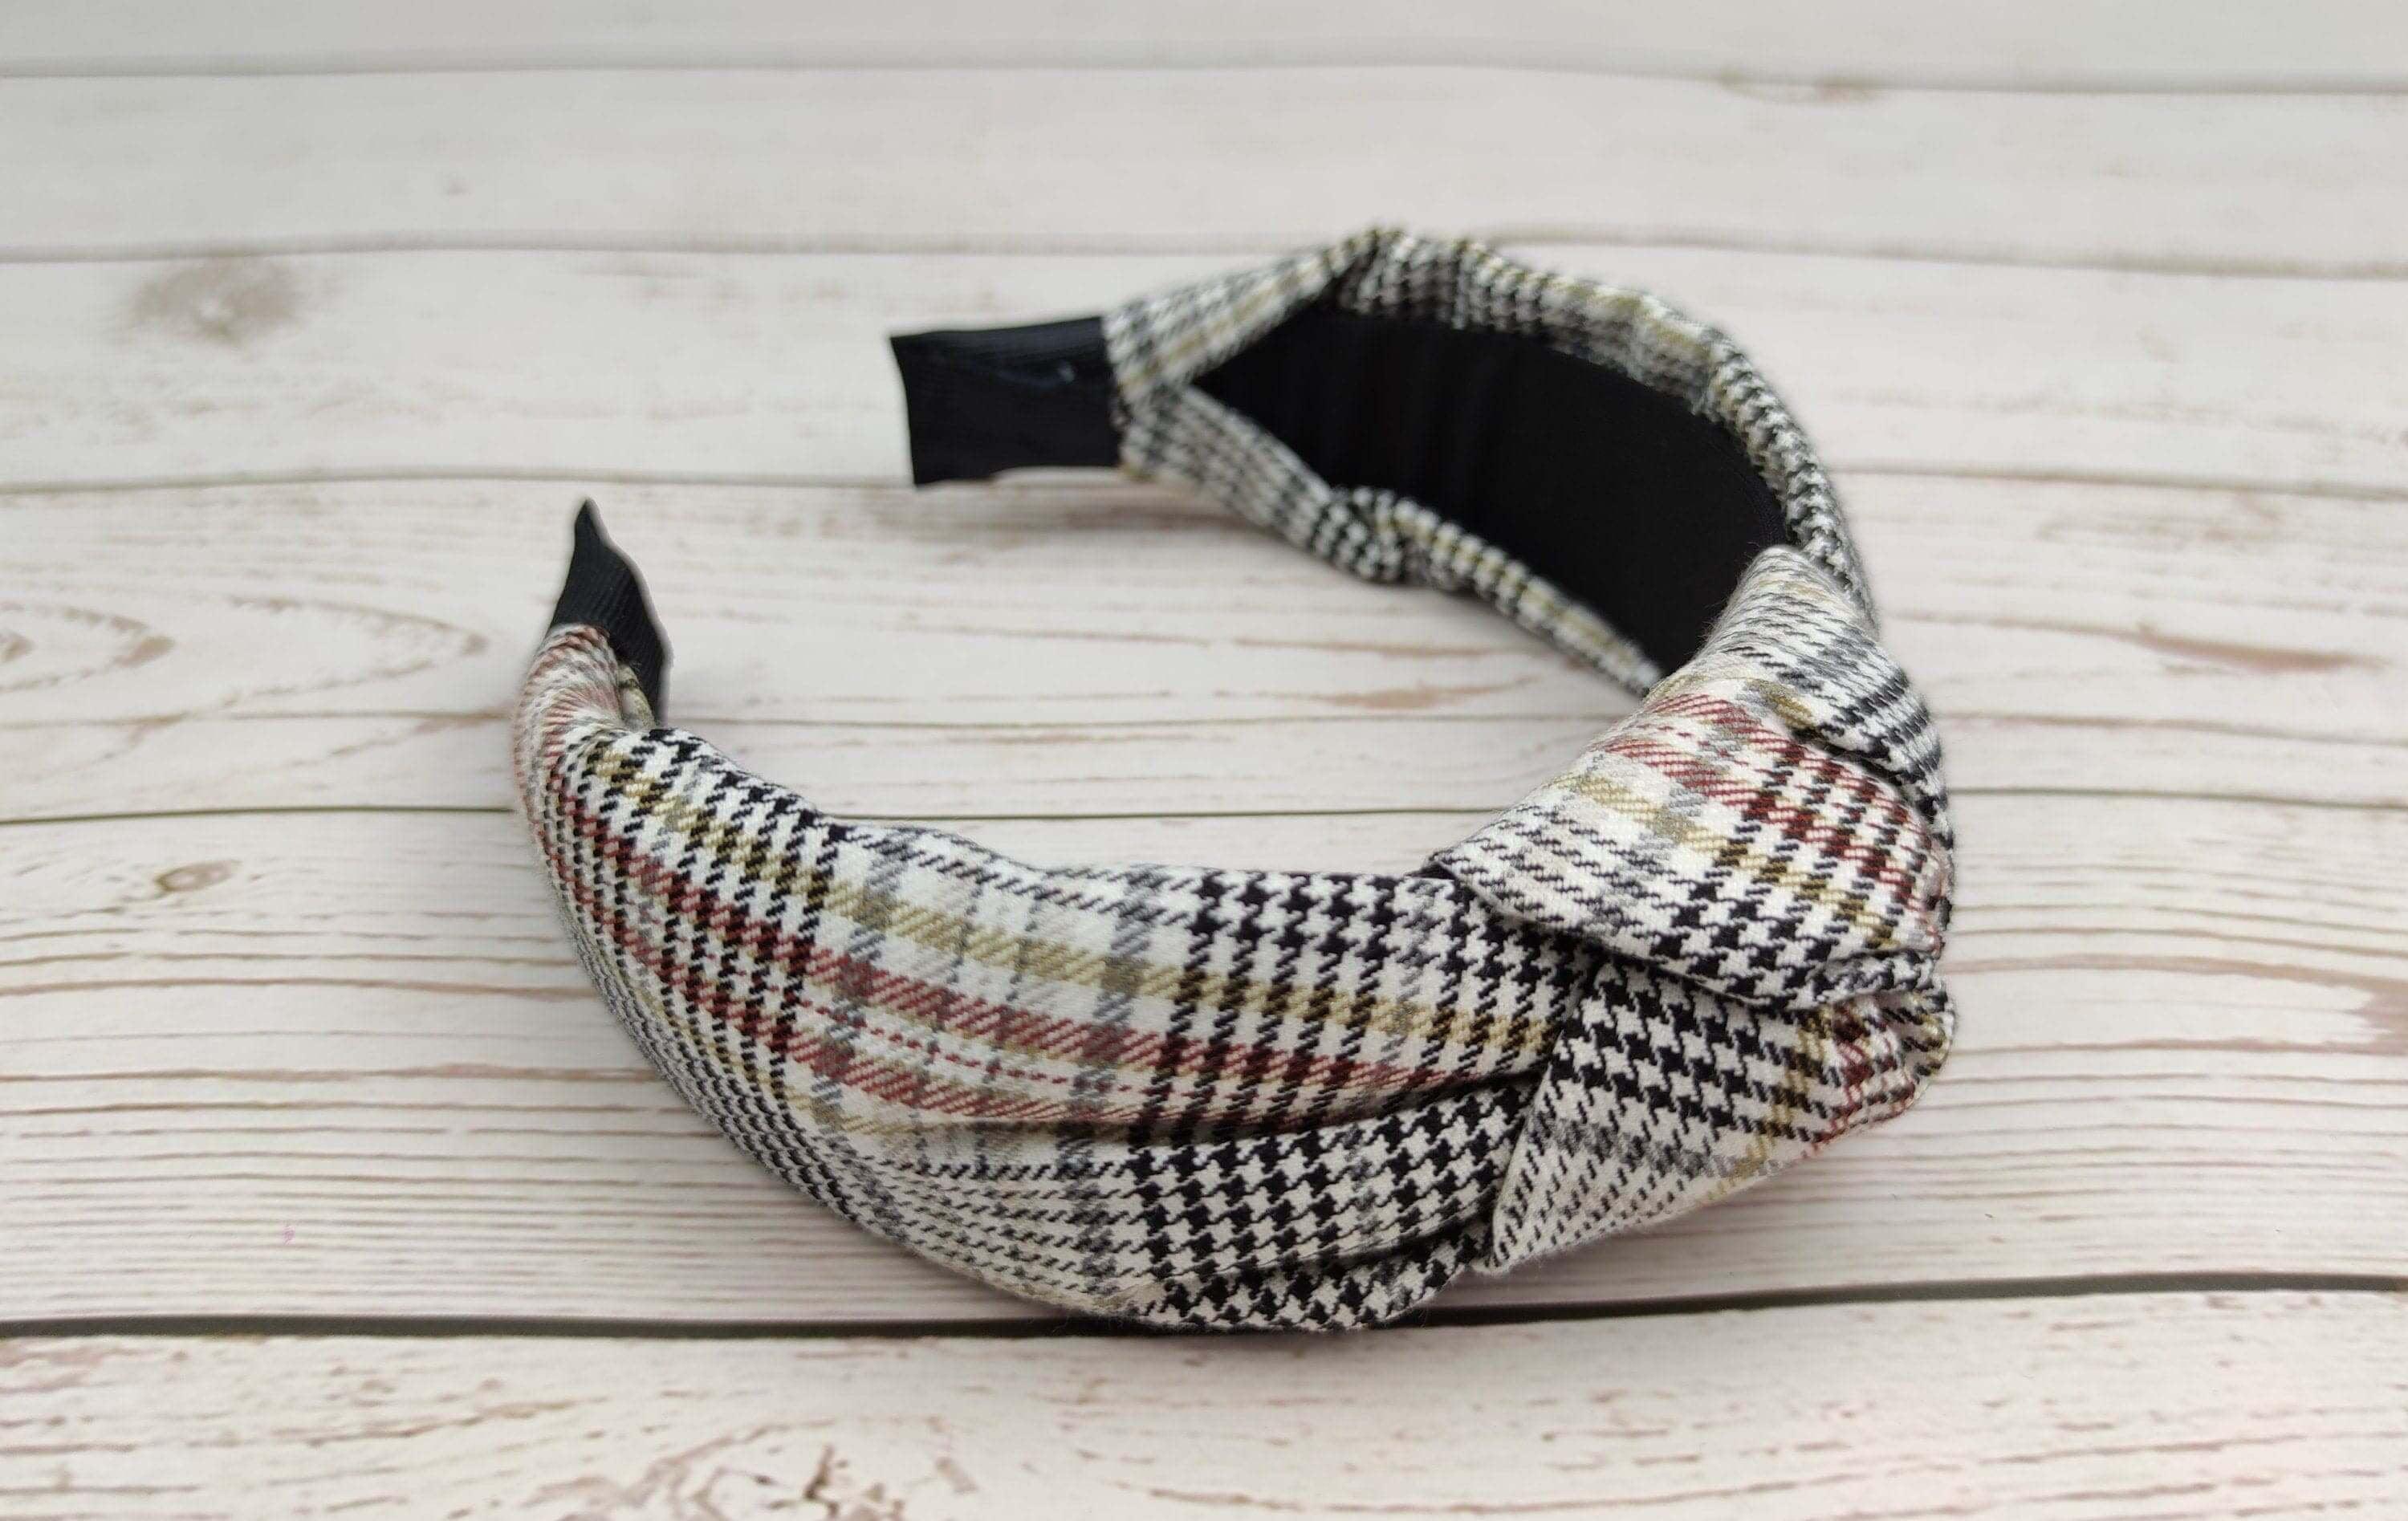 Premium White and Black Crepe Knotted Headband - Casual Fashion Houndstooth Hairband for College with Yellow Brown Striped Accents available at Moyoni Design